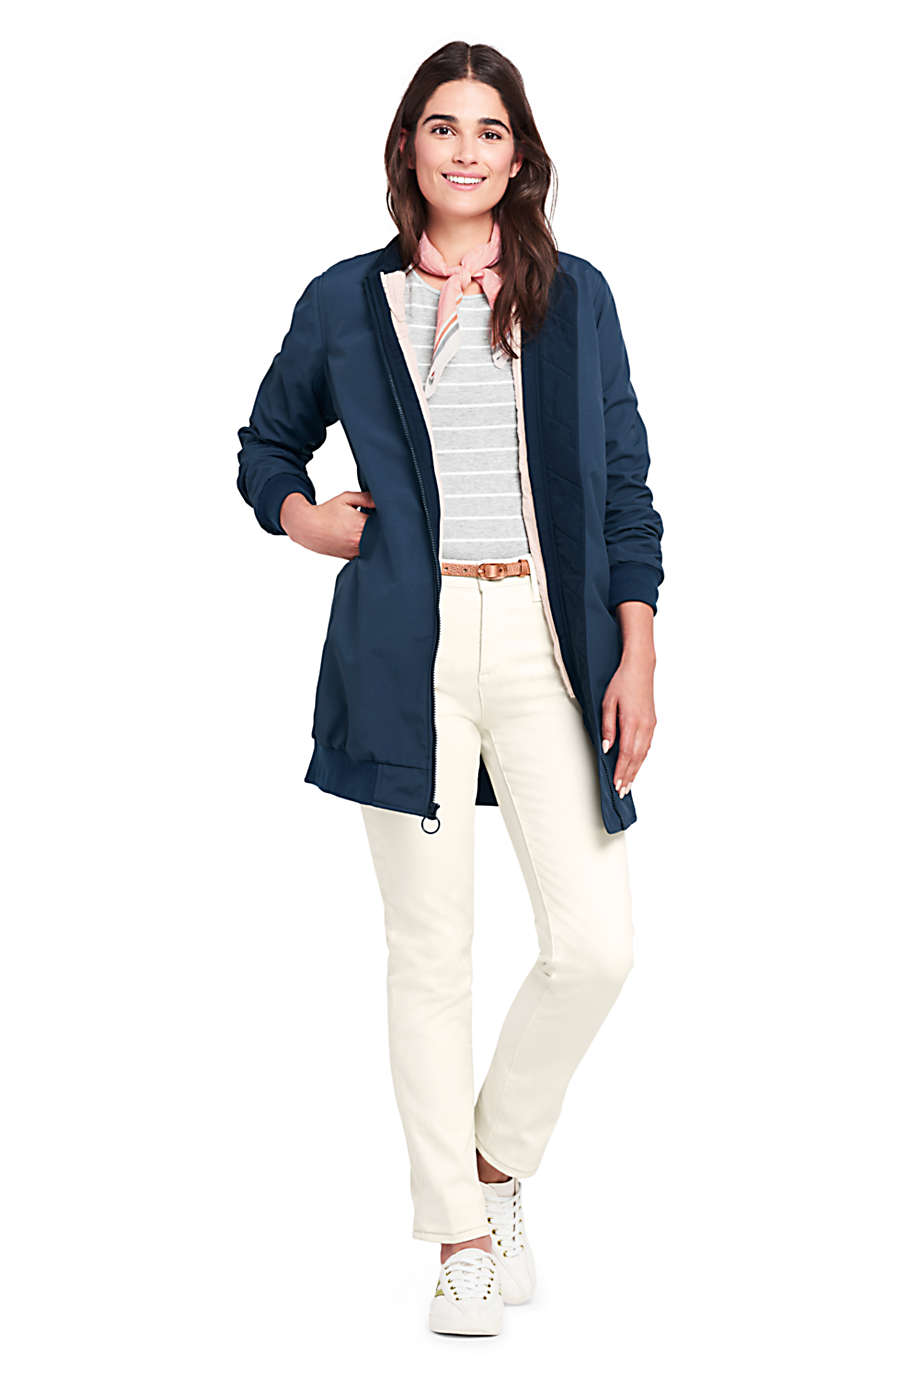 Lands' End Women's 3 in 1 Bomber Long Squall Coat